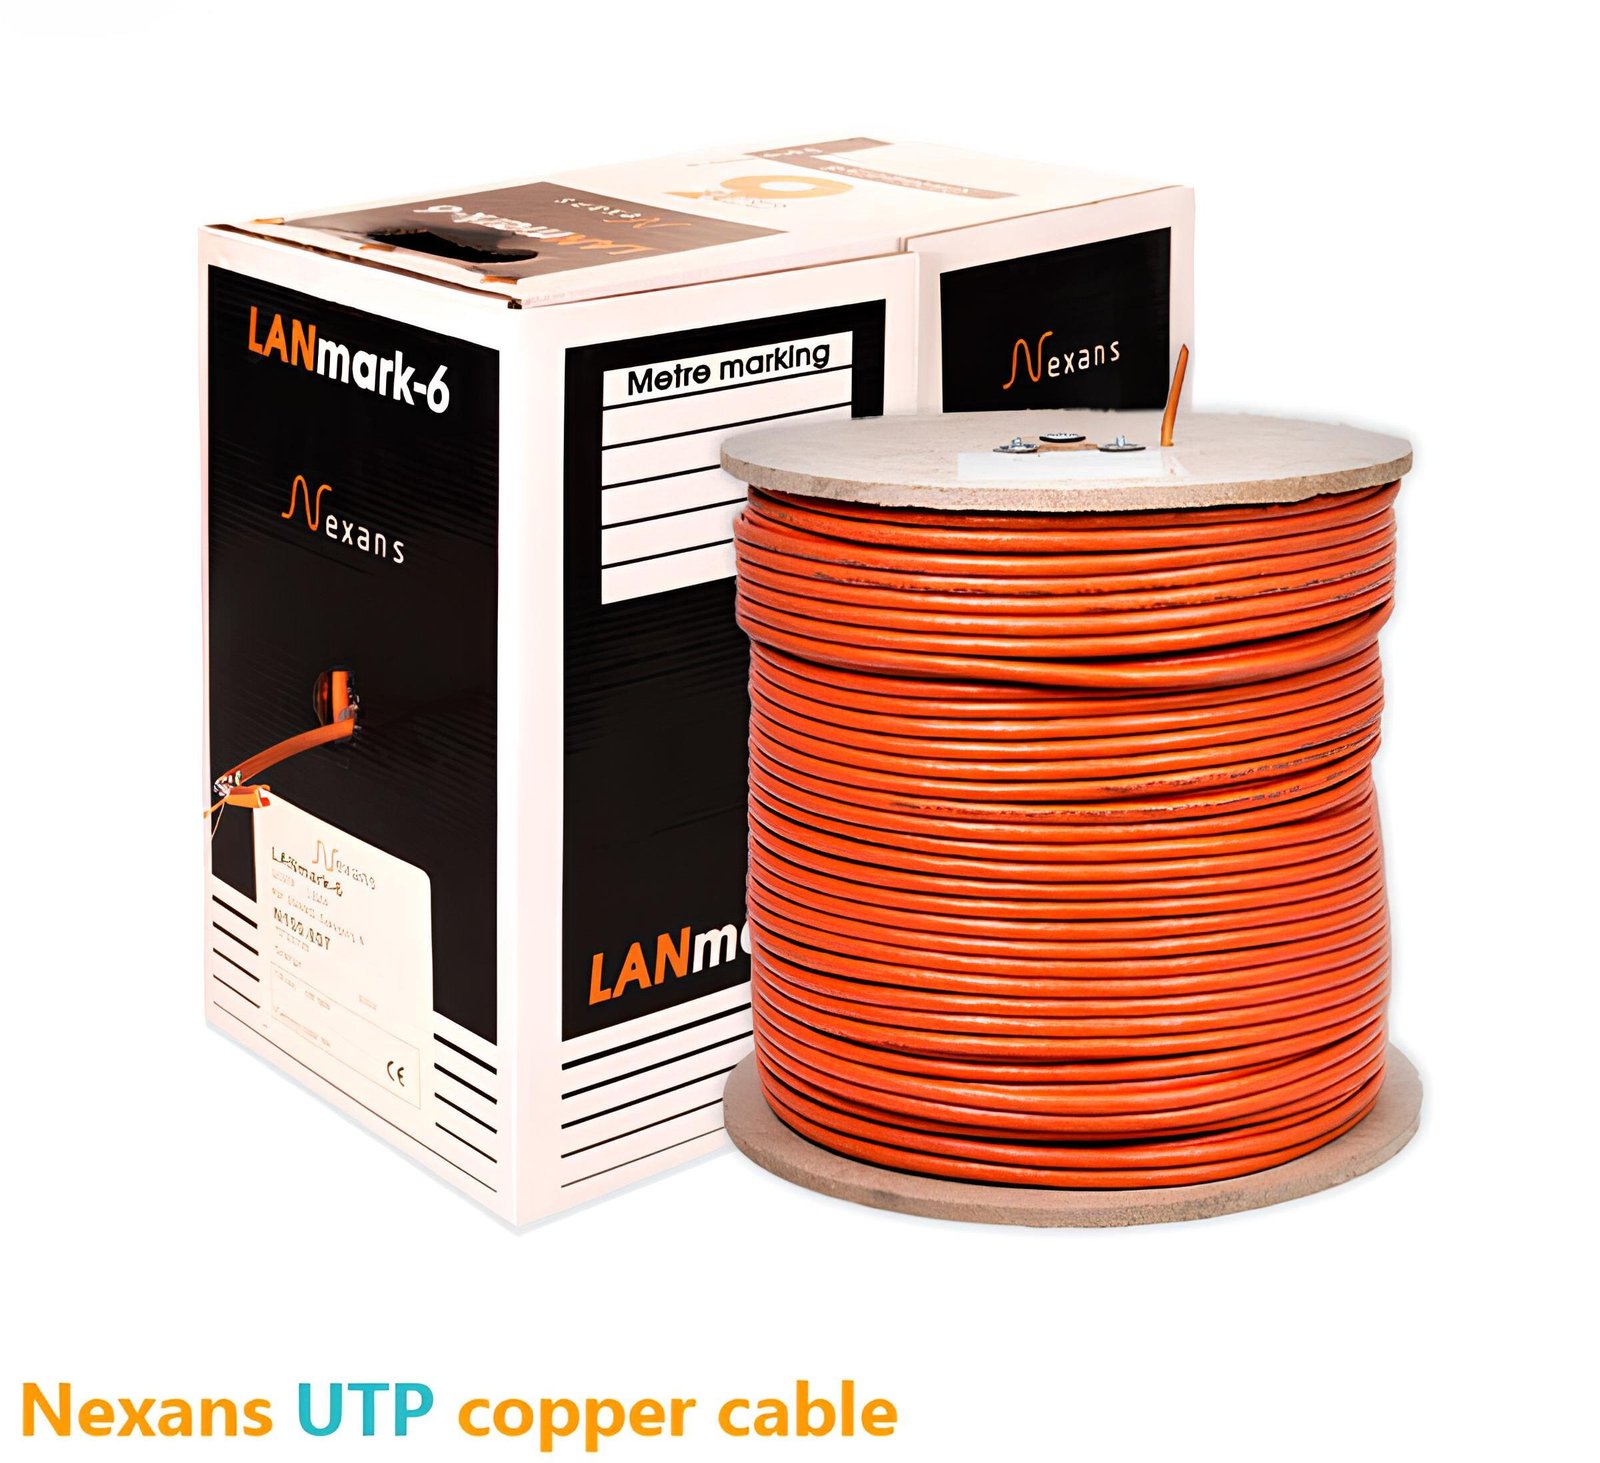 Nexans Cable Distributors in UAE: A Comprehensive Guide